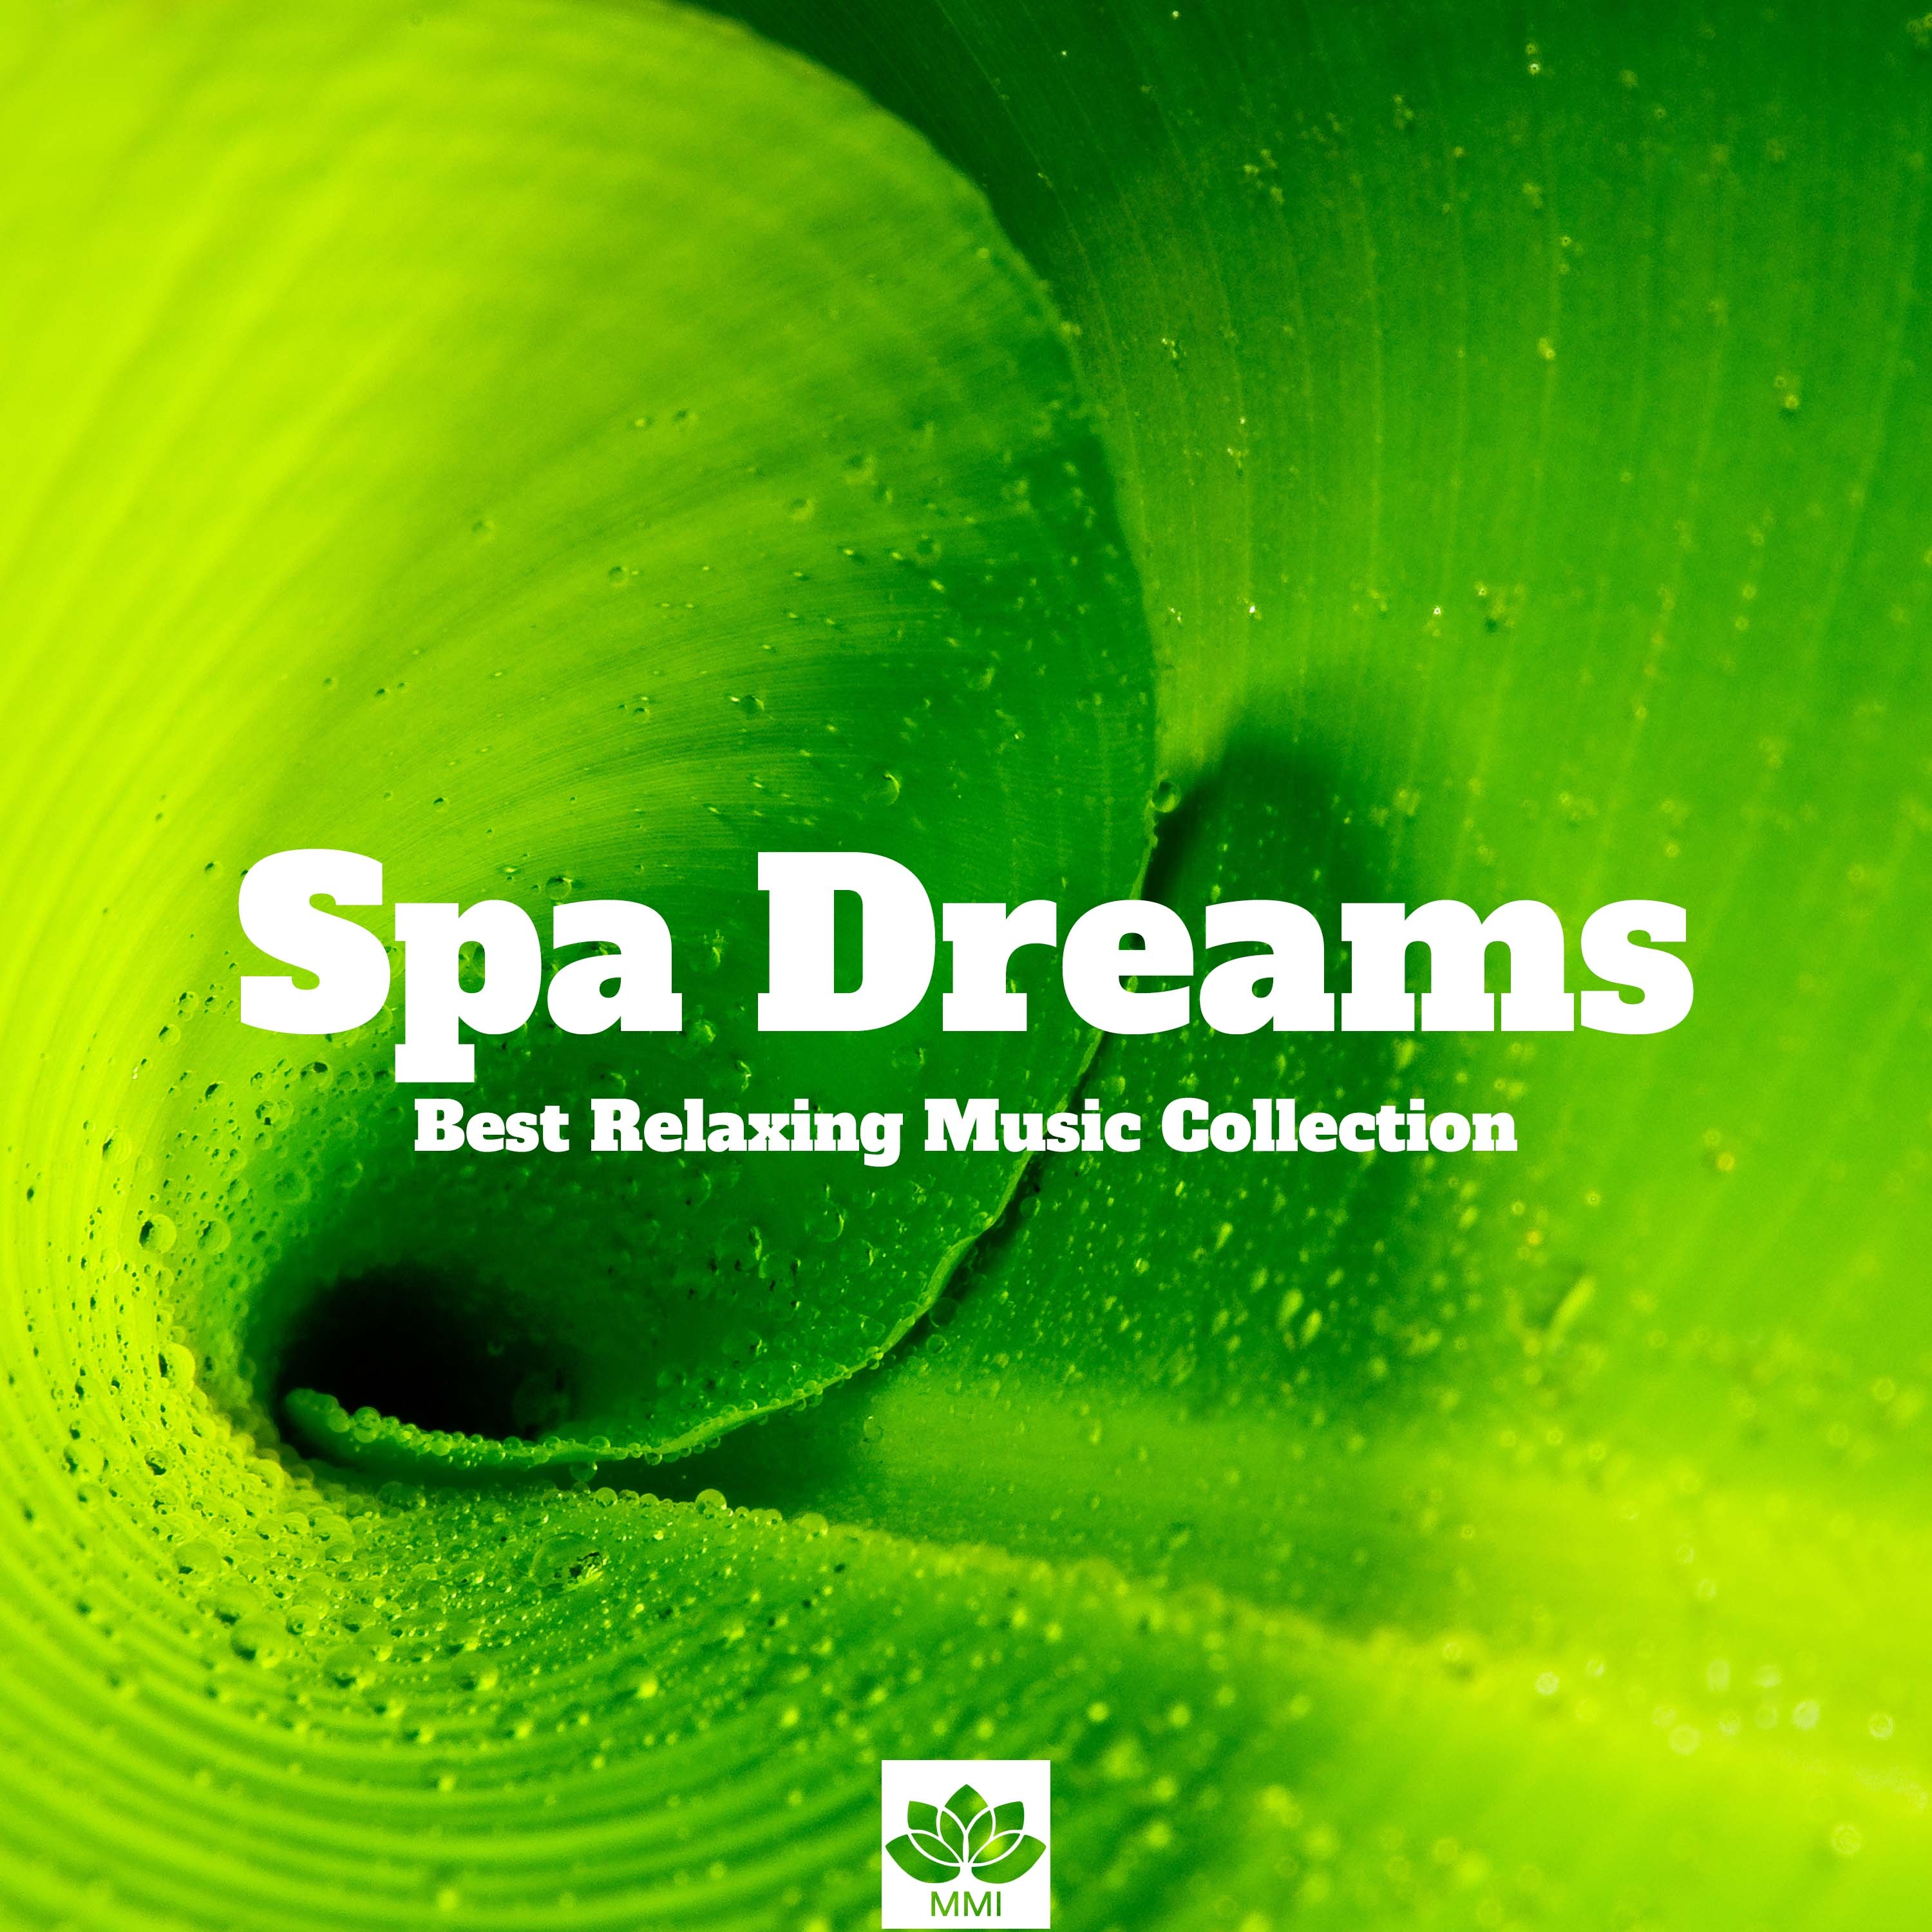 Spa Dreams - Best Relaxing Music Collection